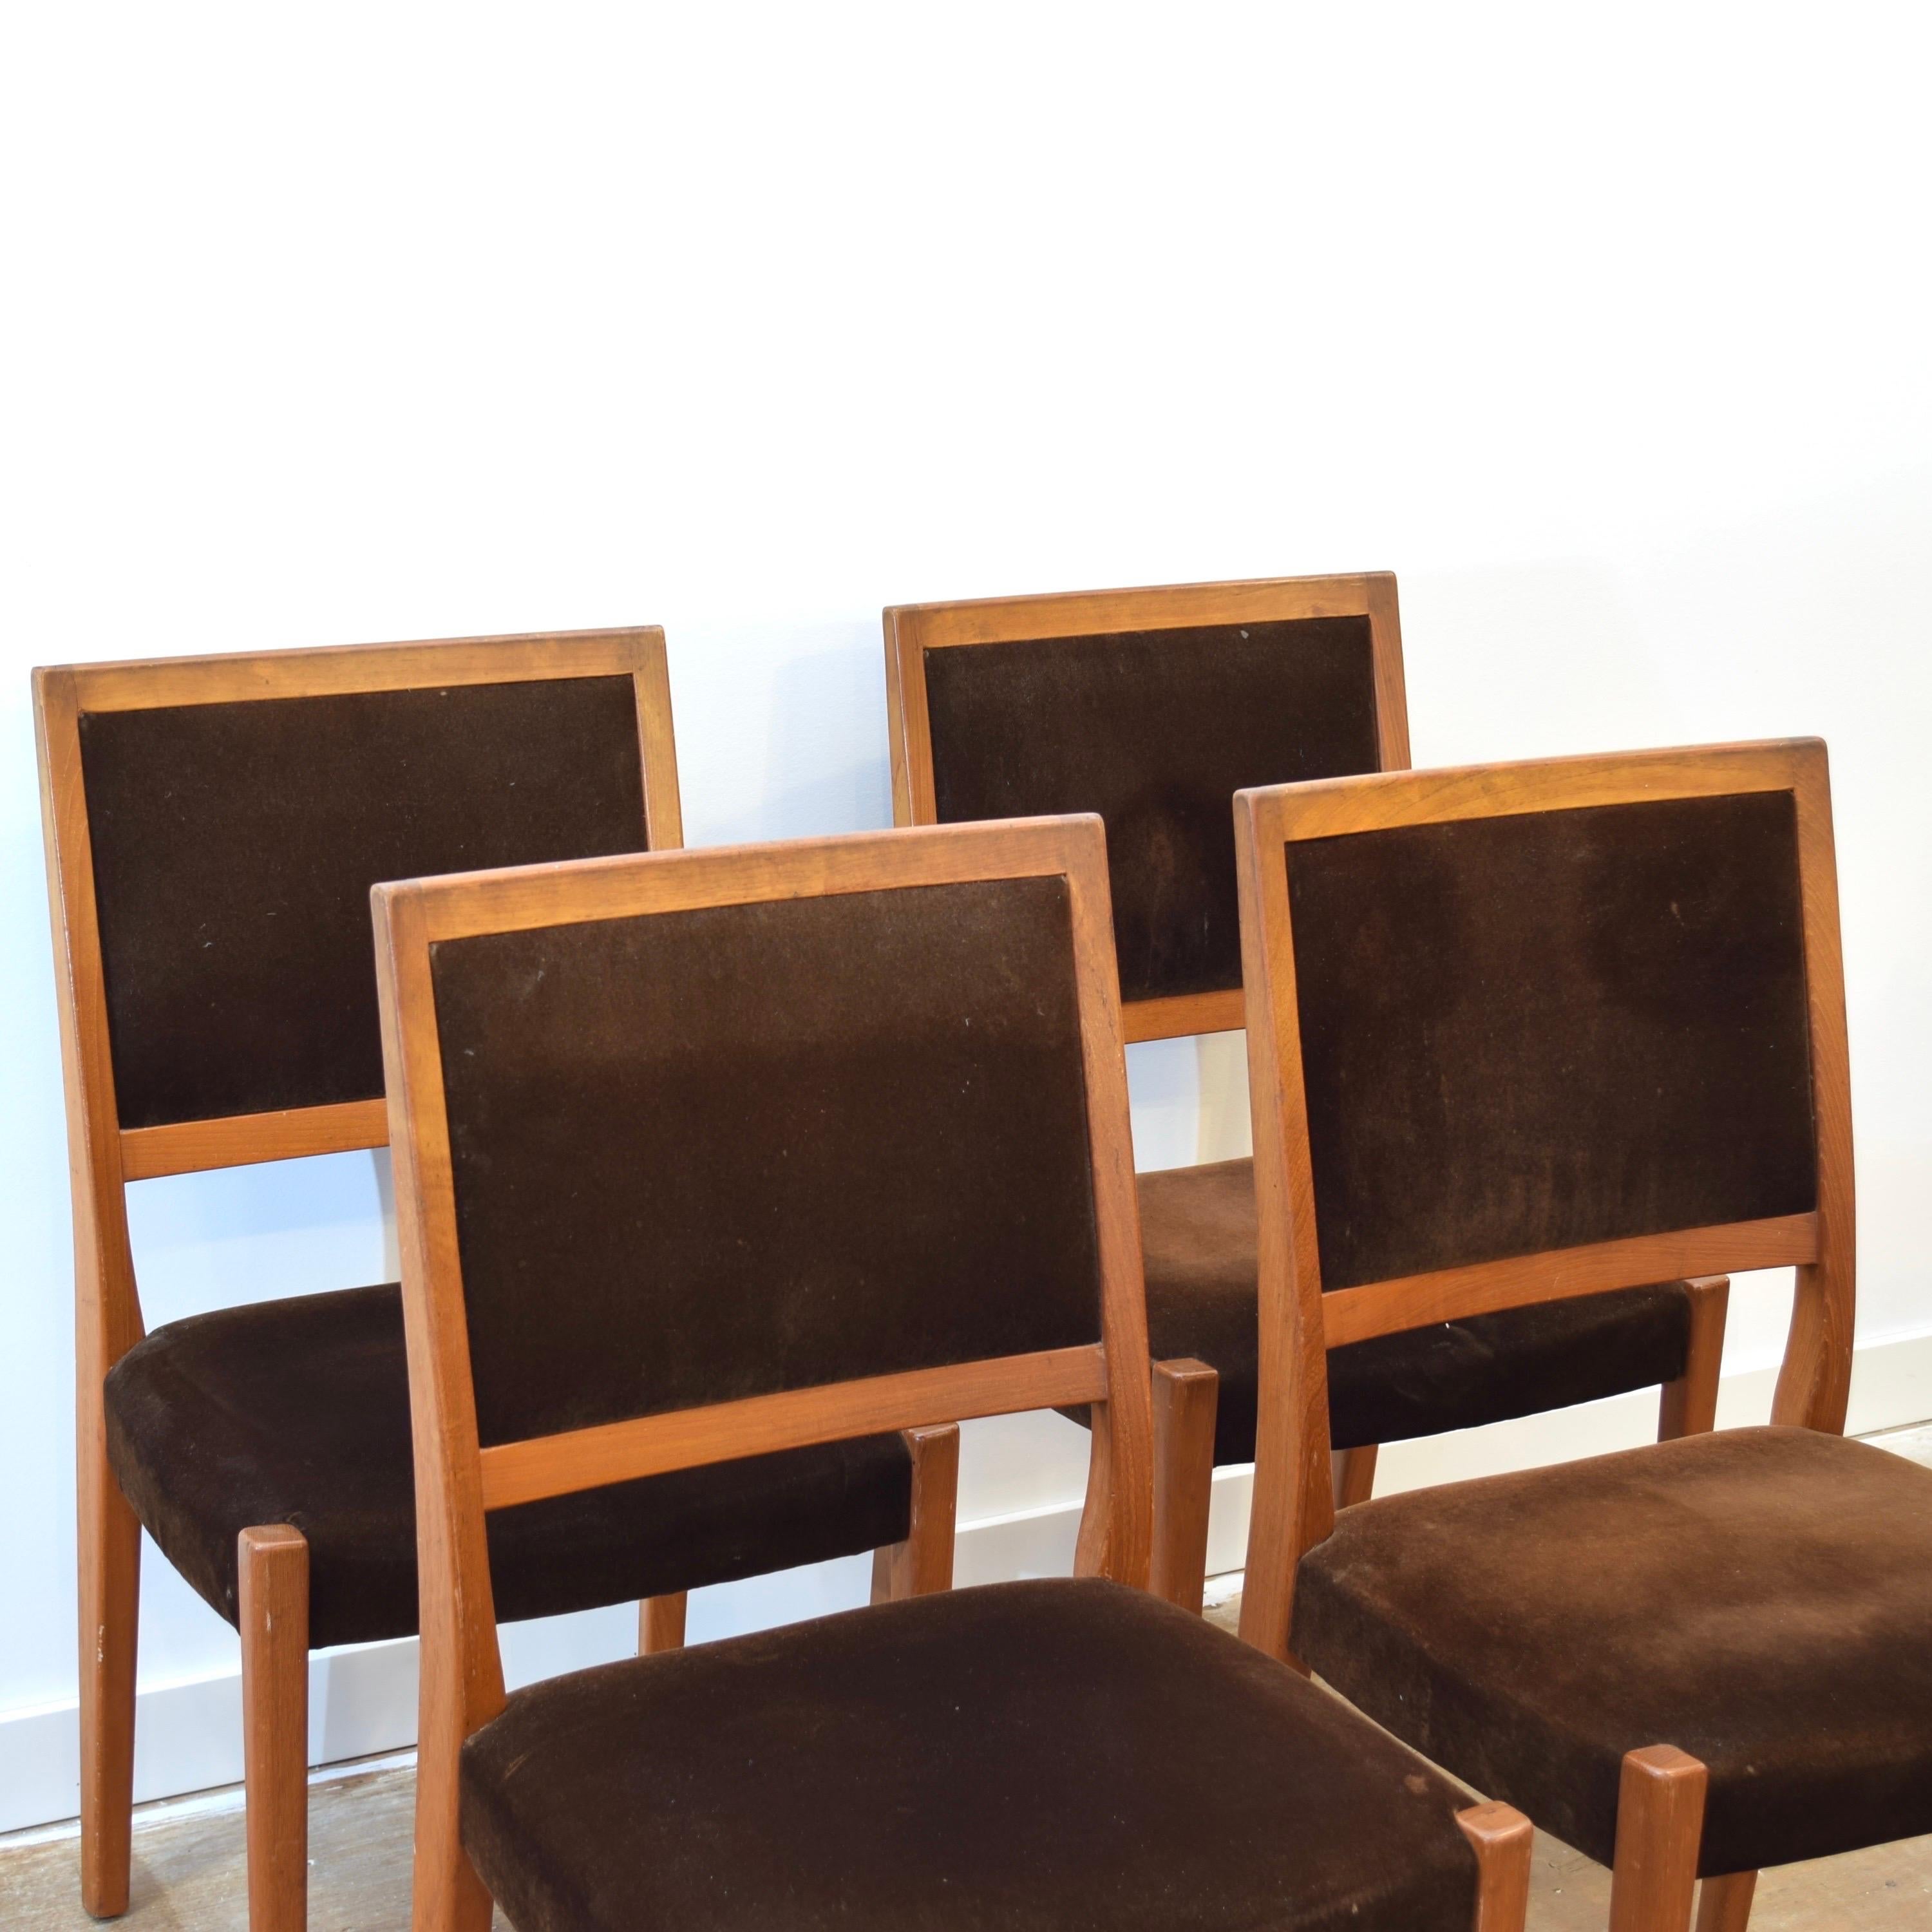 Condition: Good Vintage Condition

Dimensions: 18” L x 18” D x 34” H (18” SH)

Description: A set of 4 vintage teak dining chairs. Made in Sweden, circa 1960s by Svegard Markaryd. In good vintage condition. Frames have been tightened. Expected